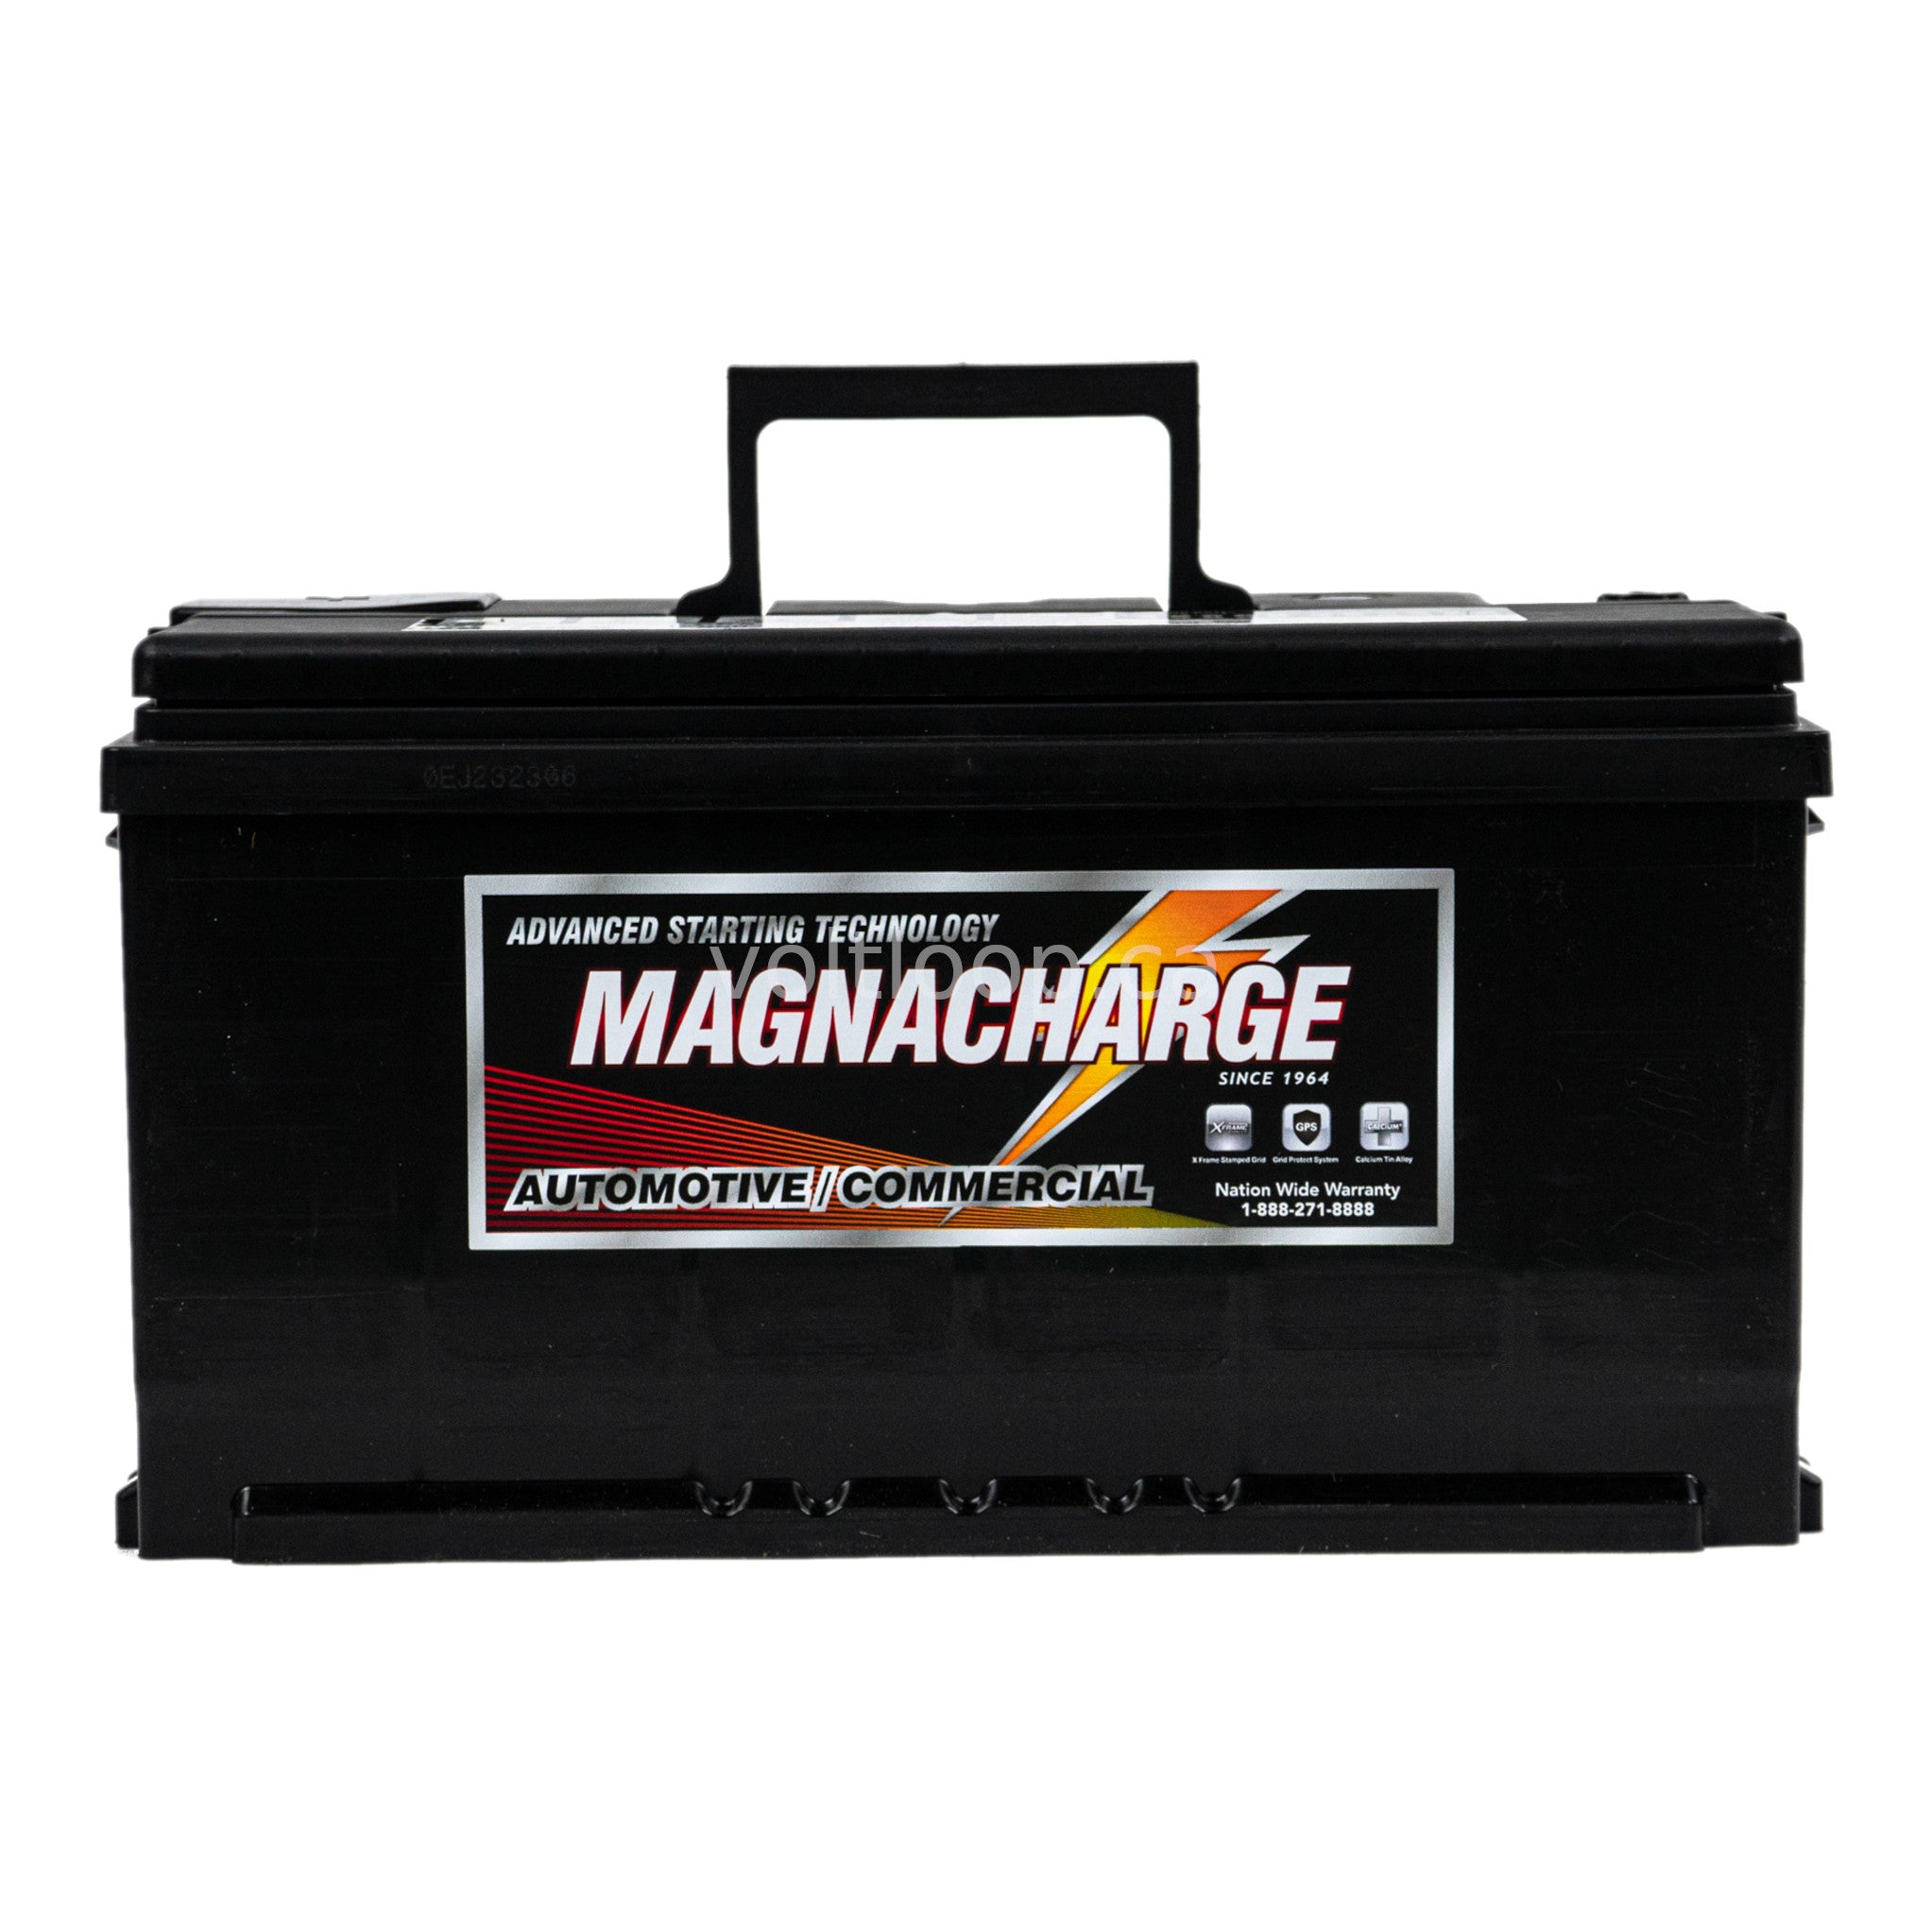 Magnacharge 49-1050 Group 49 Car Battery